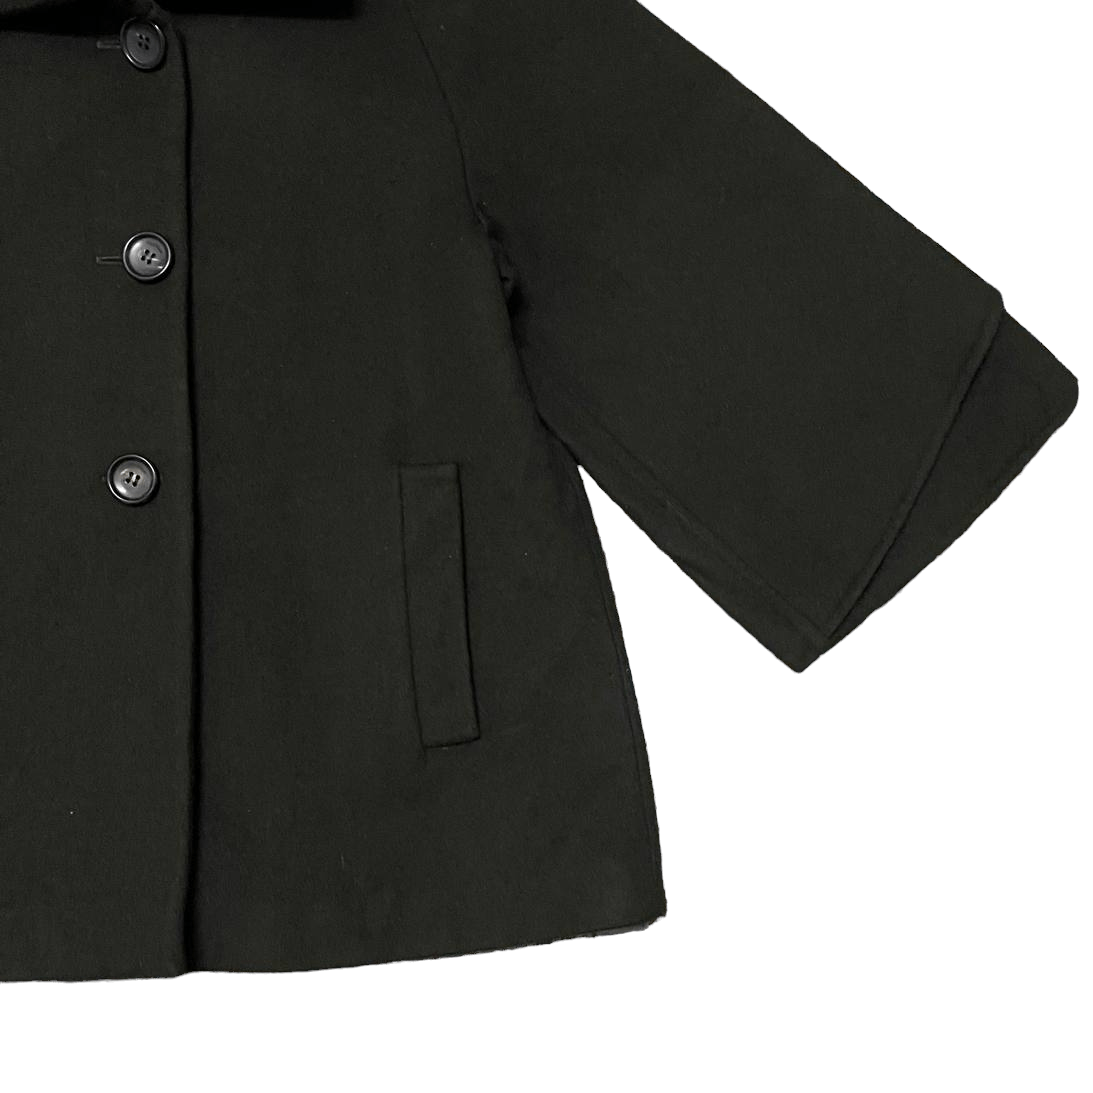 Archival Clothing - Archive Max Mara Made in Italy Wool Coat - 4